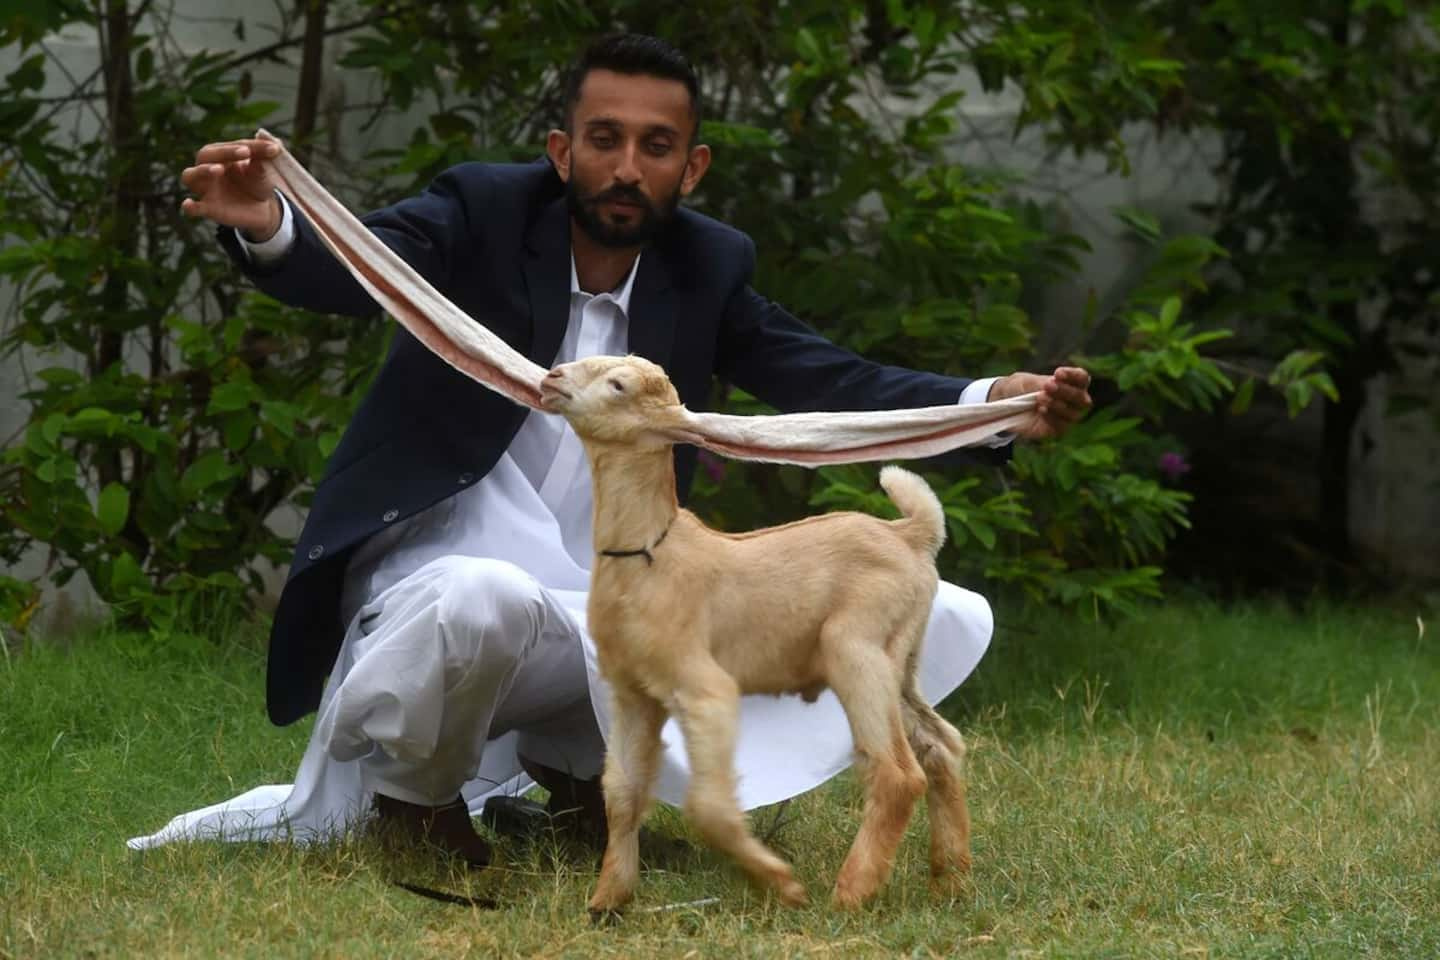 [IN PHOTOS] A little goat with long ears ignites social networks